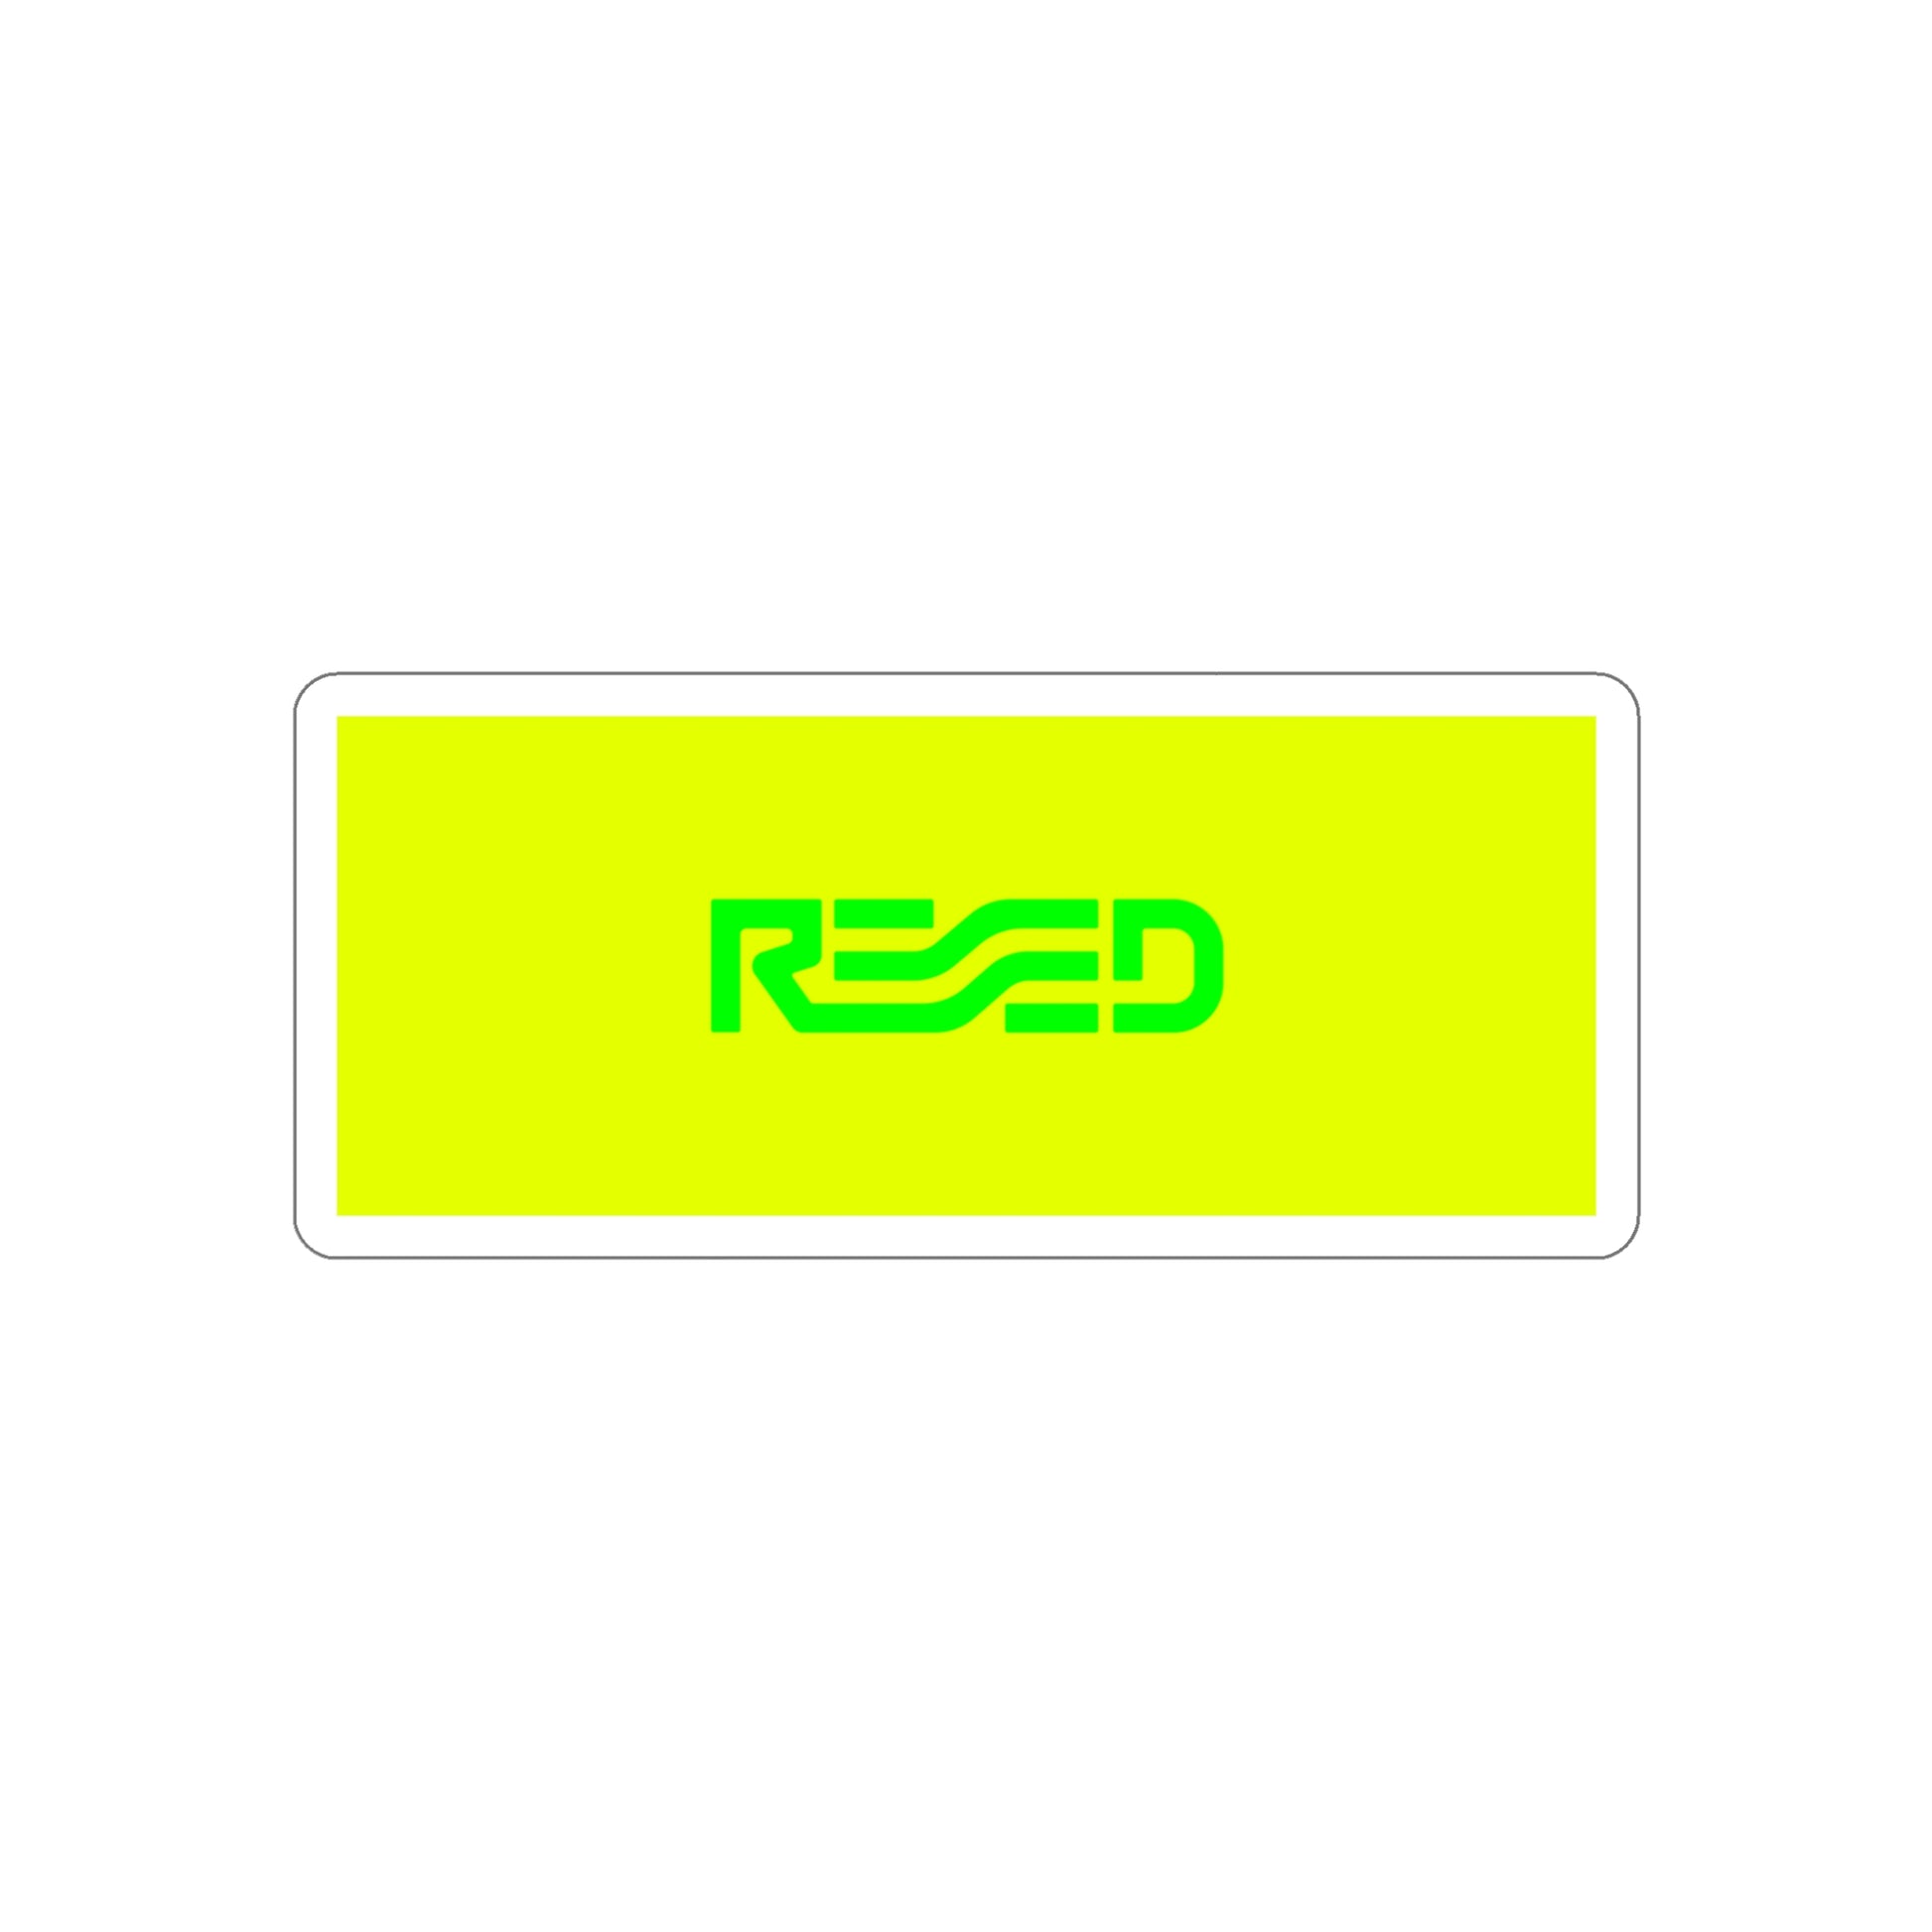 REED LOGO YELLOW/GREEN STICKER - Never Stop Chasing